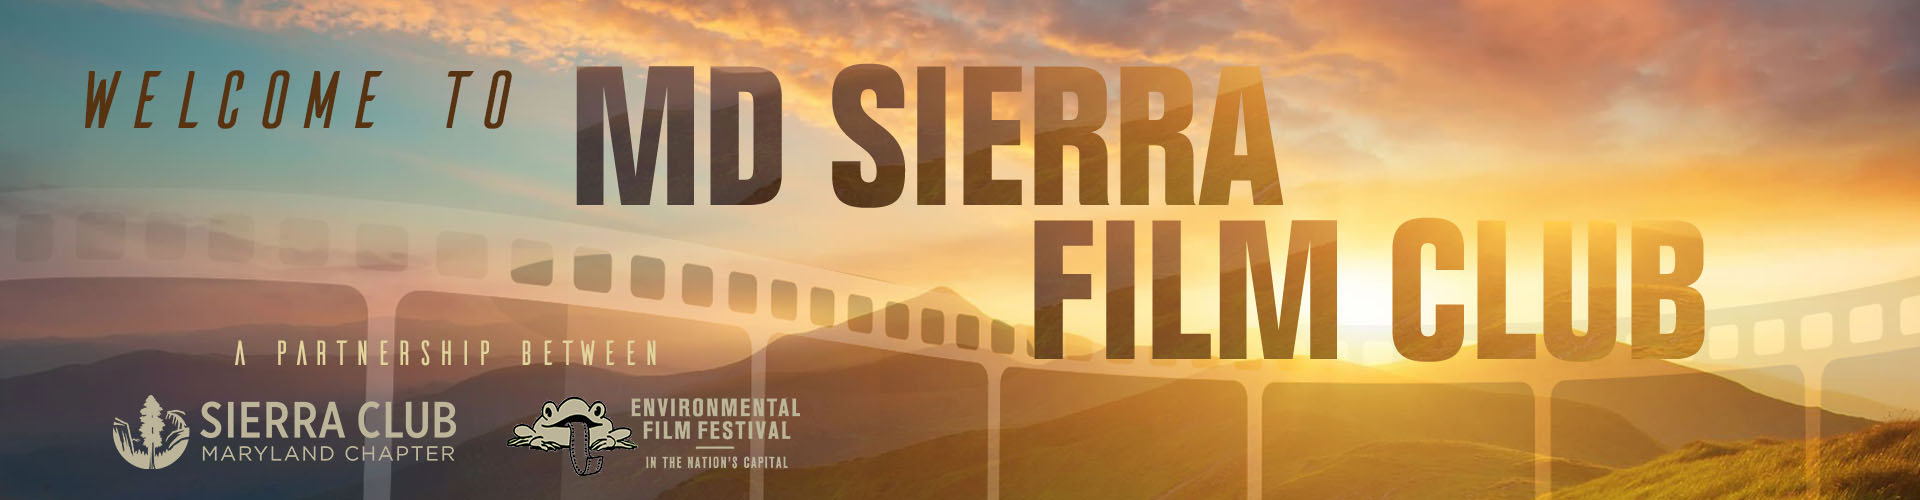 MD Sierra Club Film welcome banner with beautiful sky background